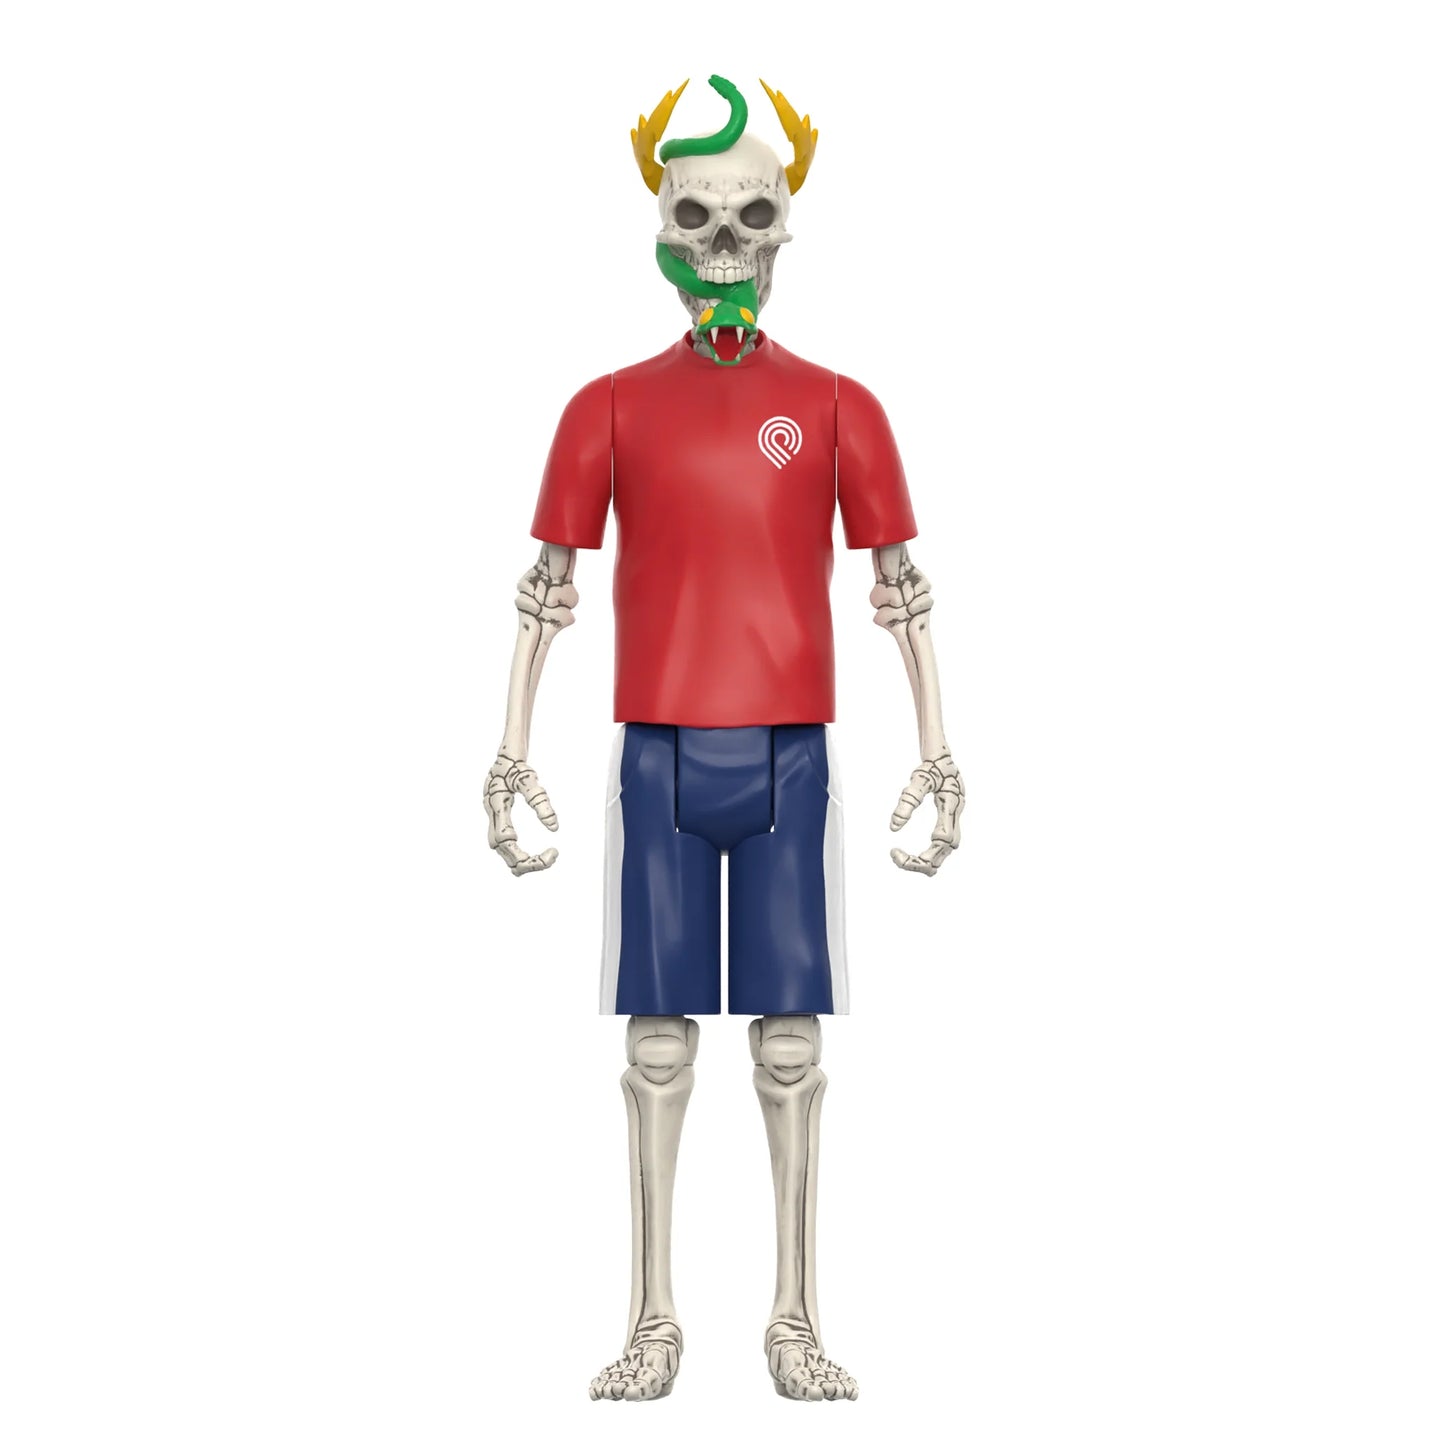 POWELL PERALTA - Super 7 Mike McGill ReAction Figure Wave 2